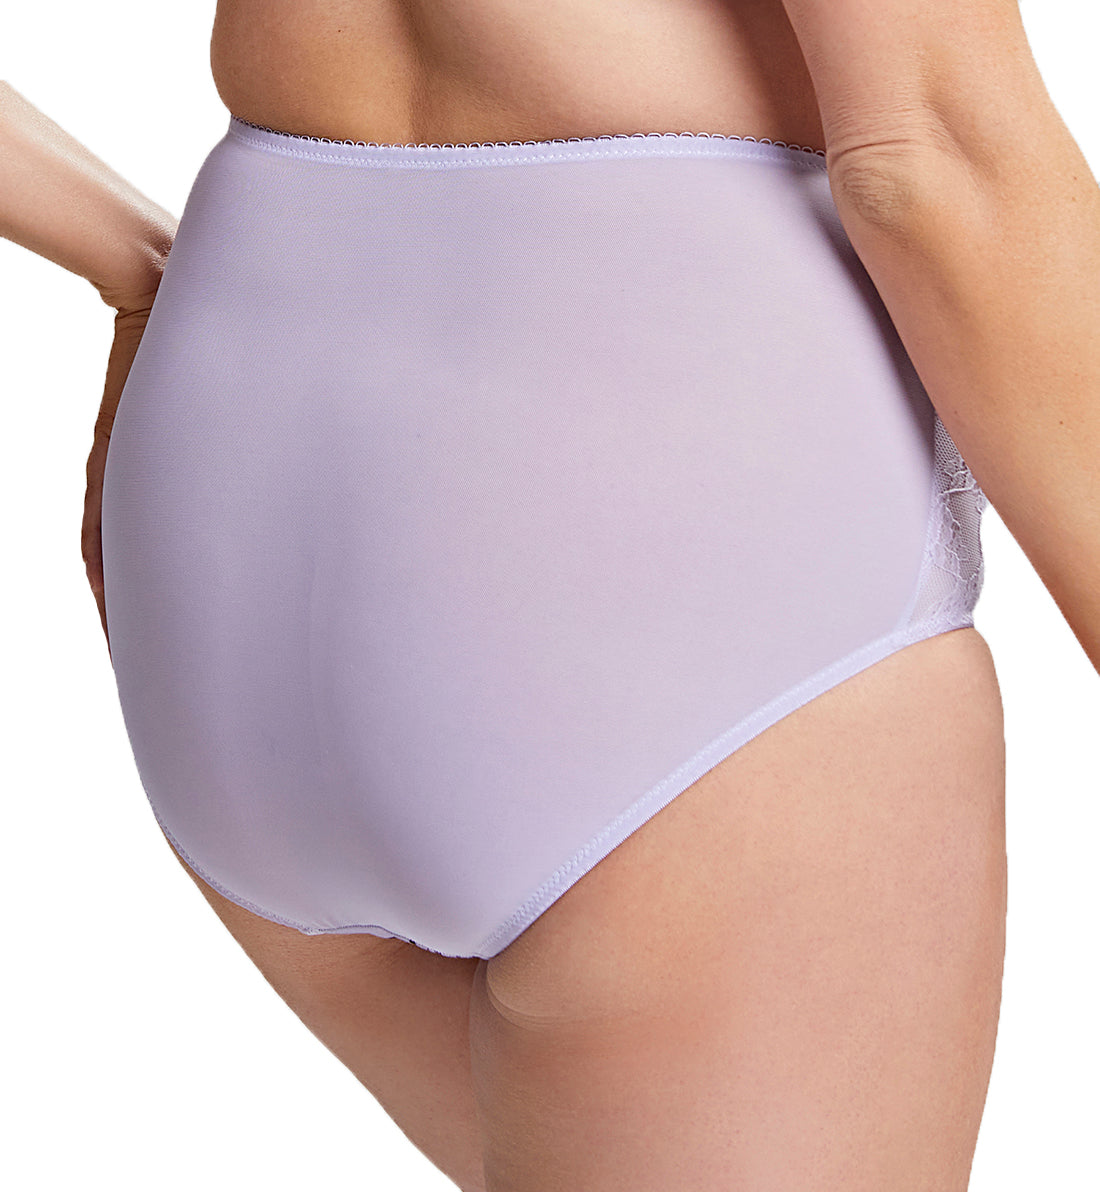 Sculptresse by Panache Chi Chi High Waist Brief (7692),Large,Spring Lilac - Spring Lilac,Large